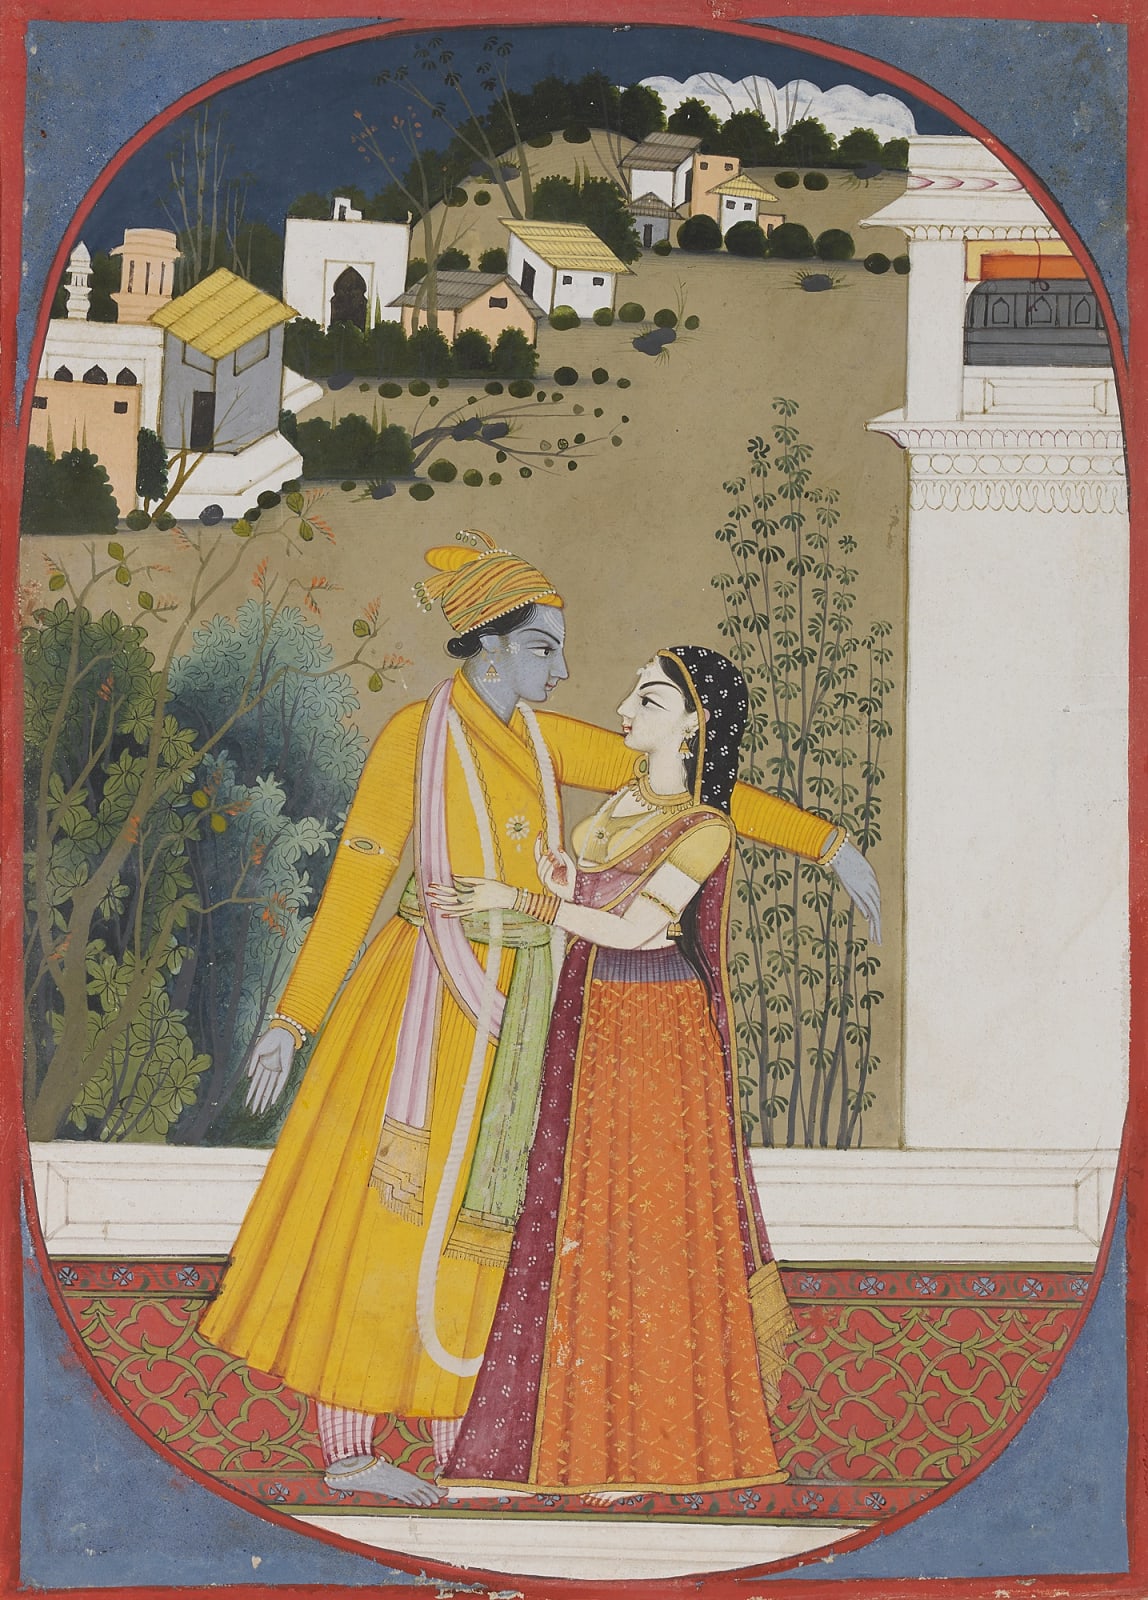 A Painting from a Barahmasa series - The month of Phalguna (February/March), Garhwal, 1780-90